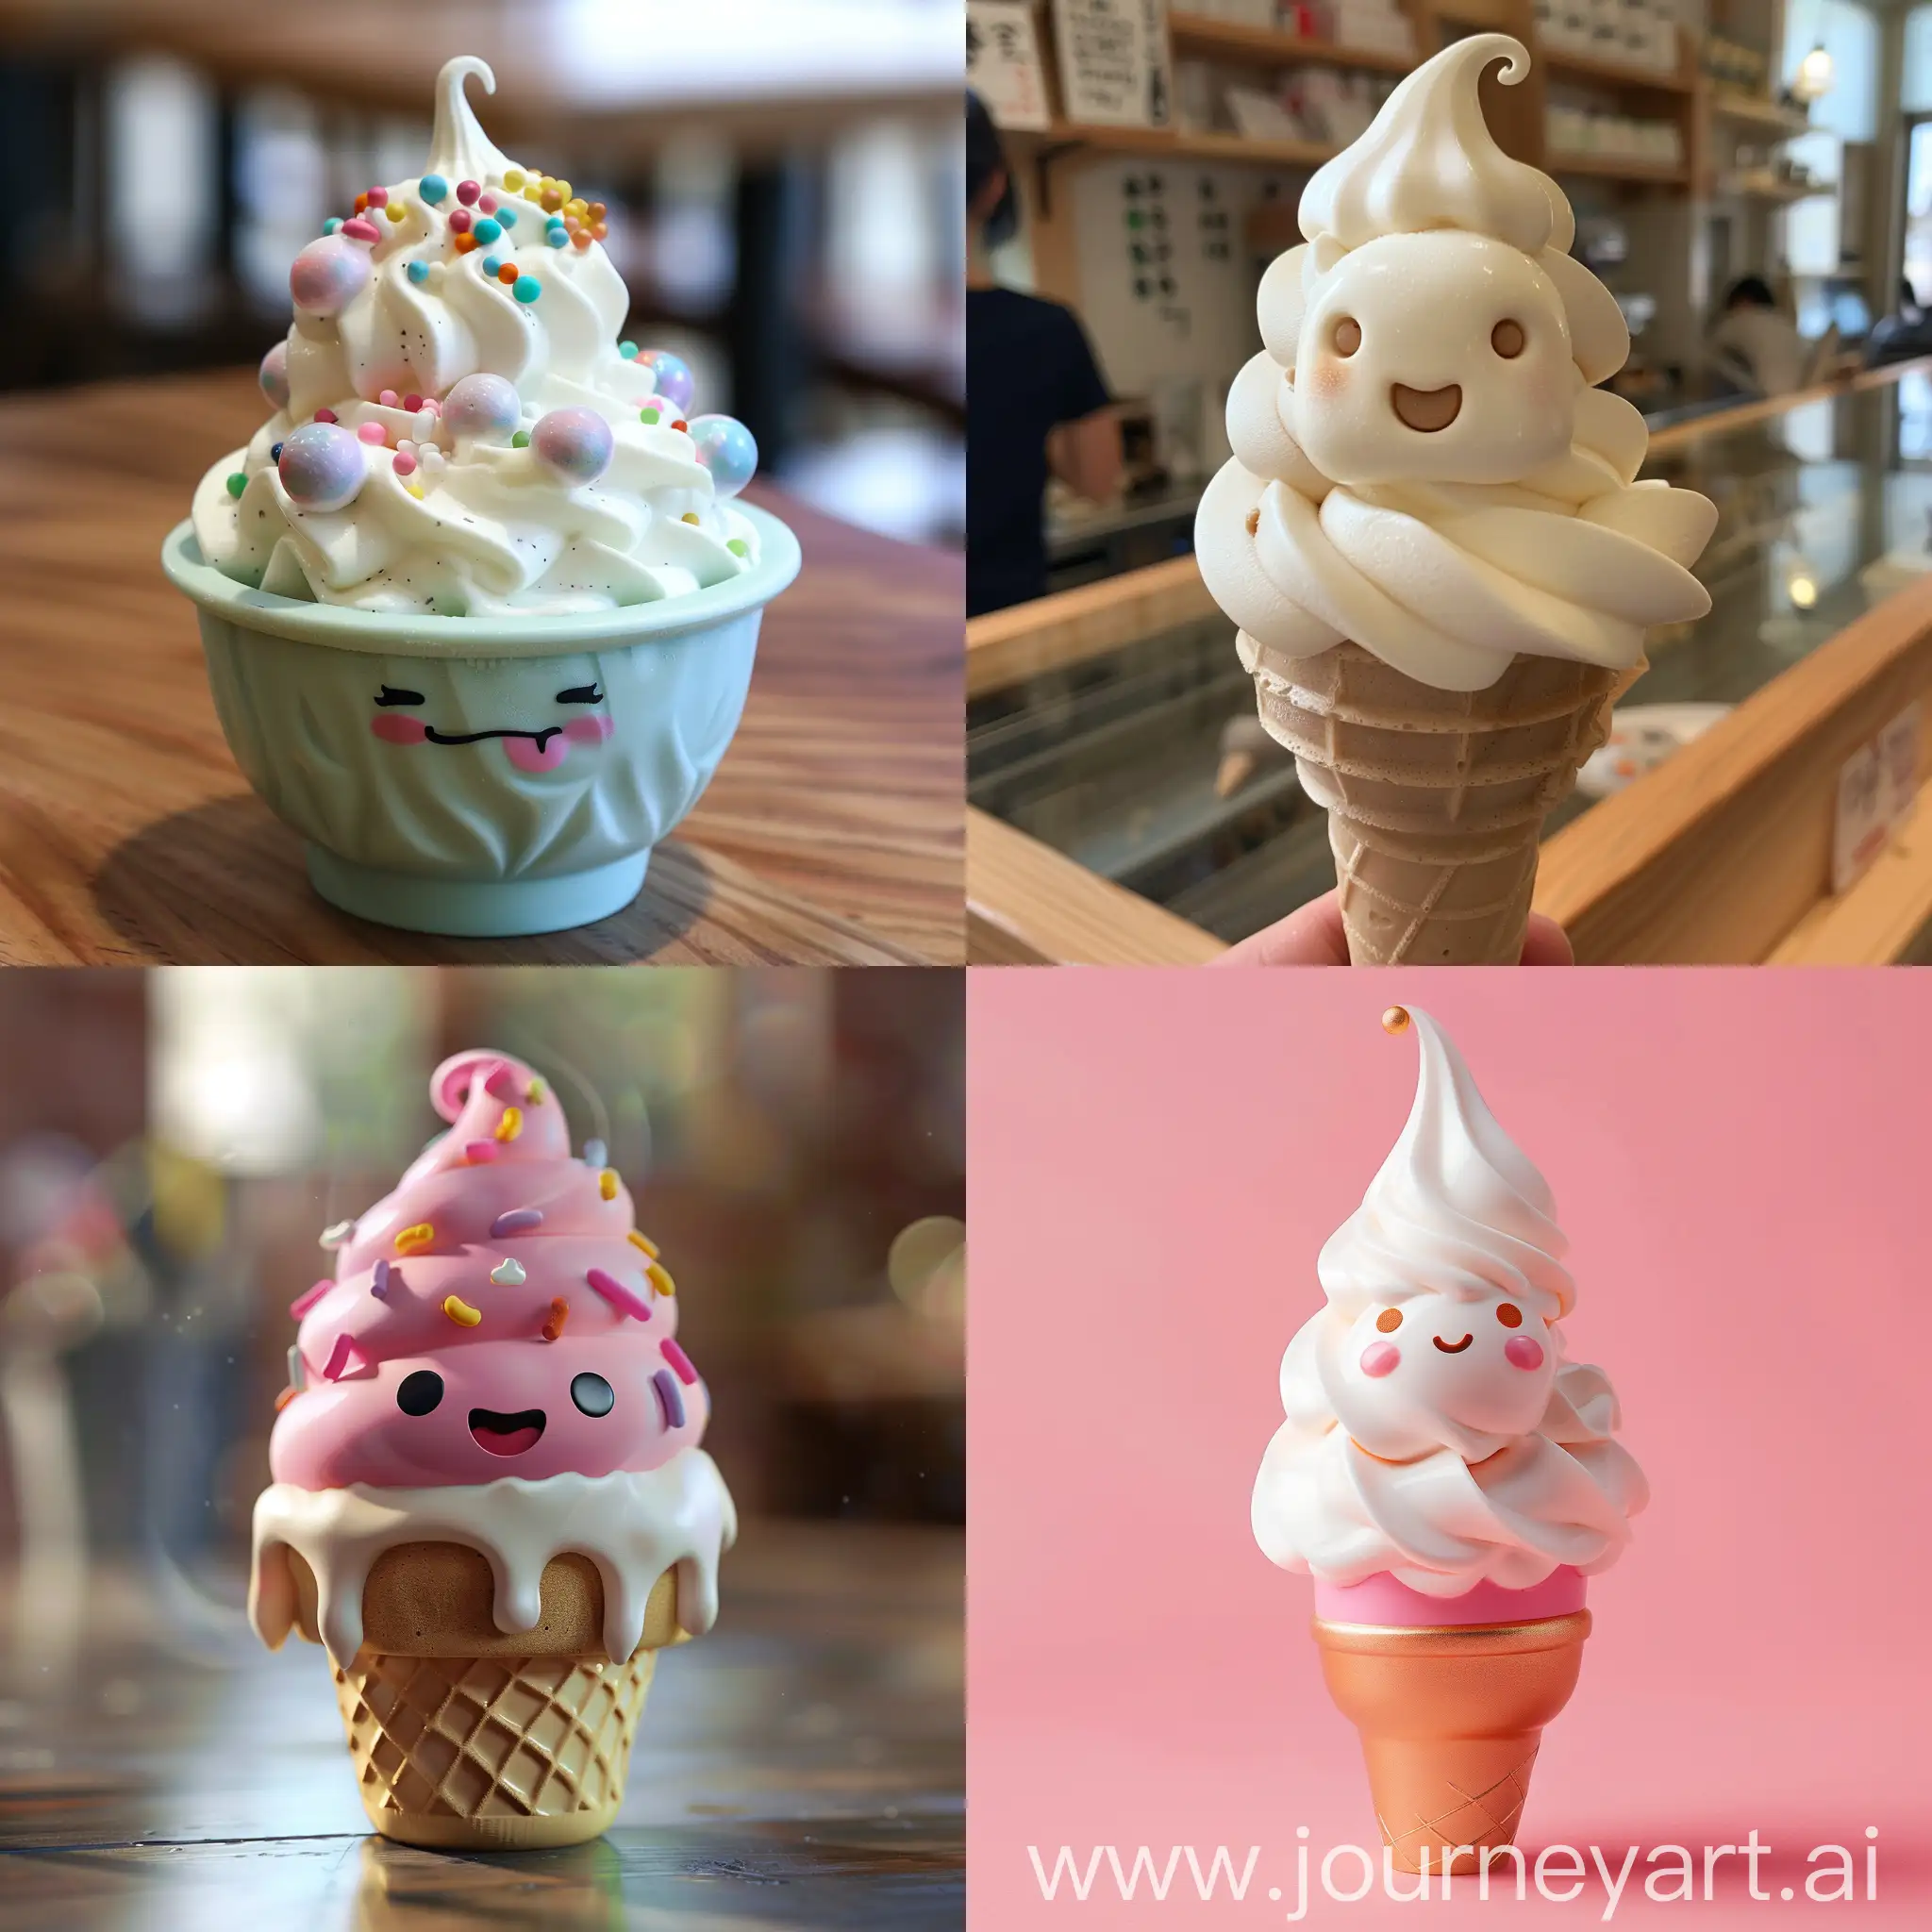 Cheerful-Soft-Ice-Cream-with-a-Friendly-Face